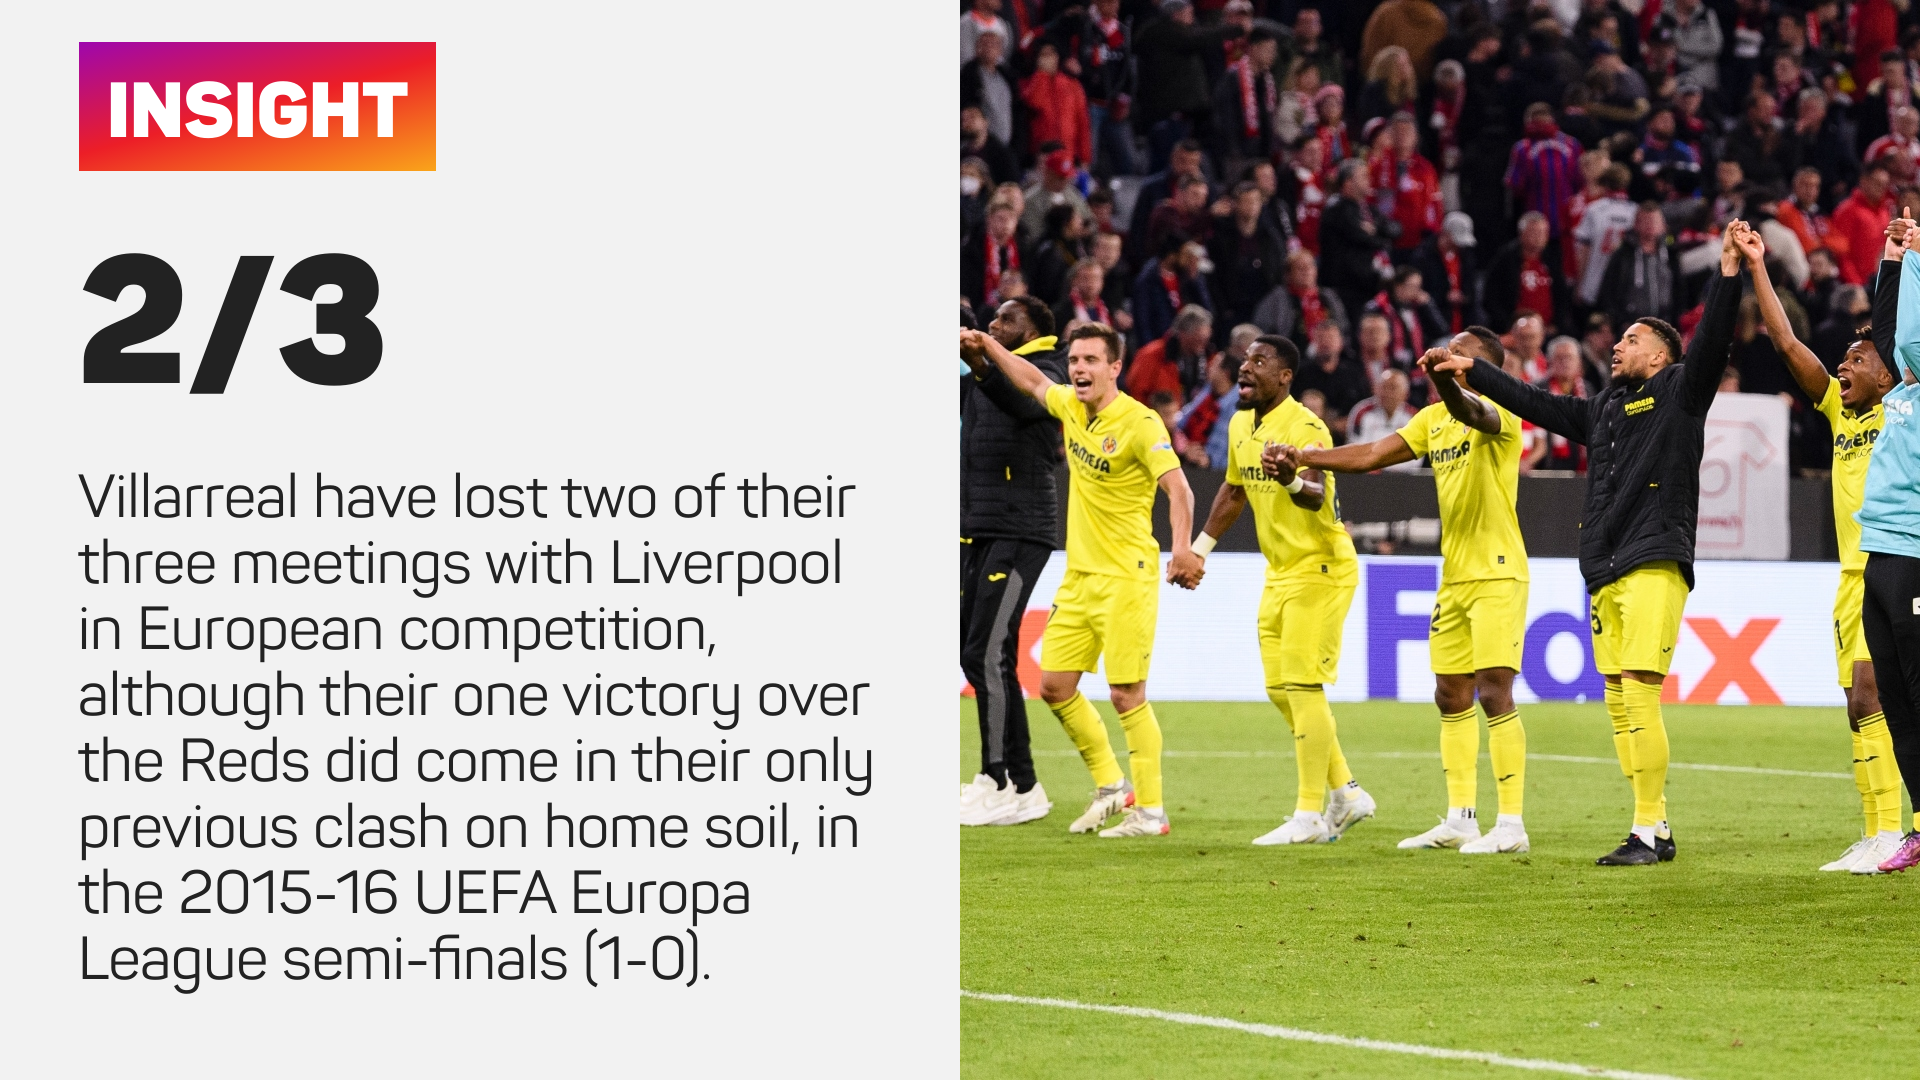 Villarreal have lost two of their three meetings with Liverpool in European competition